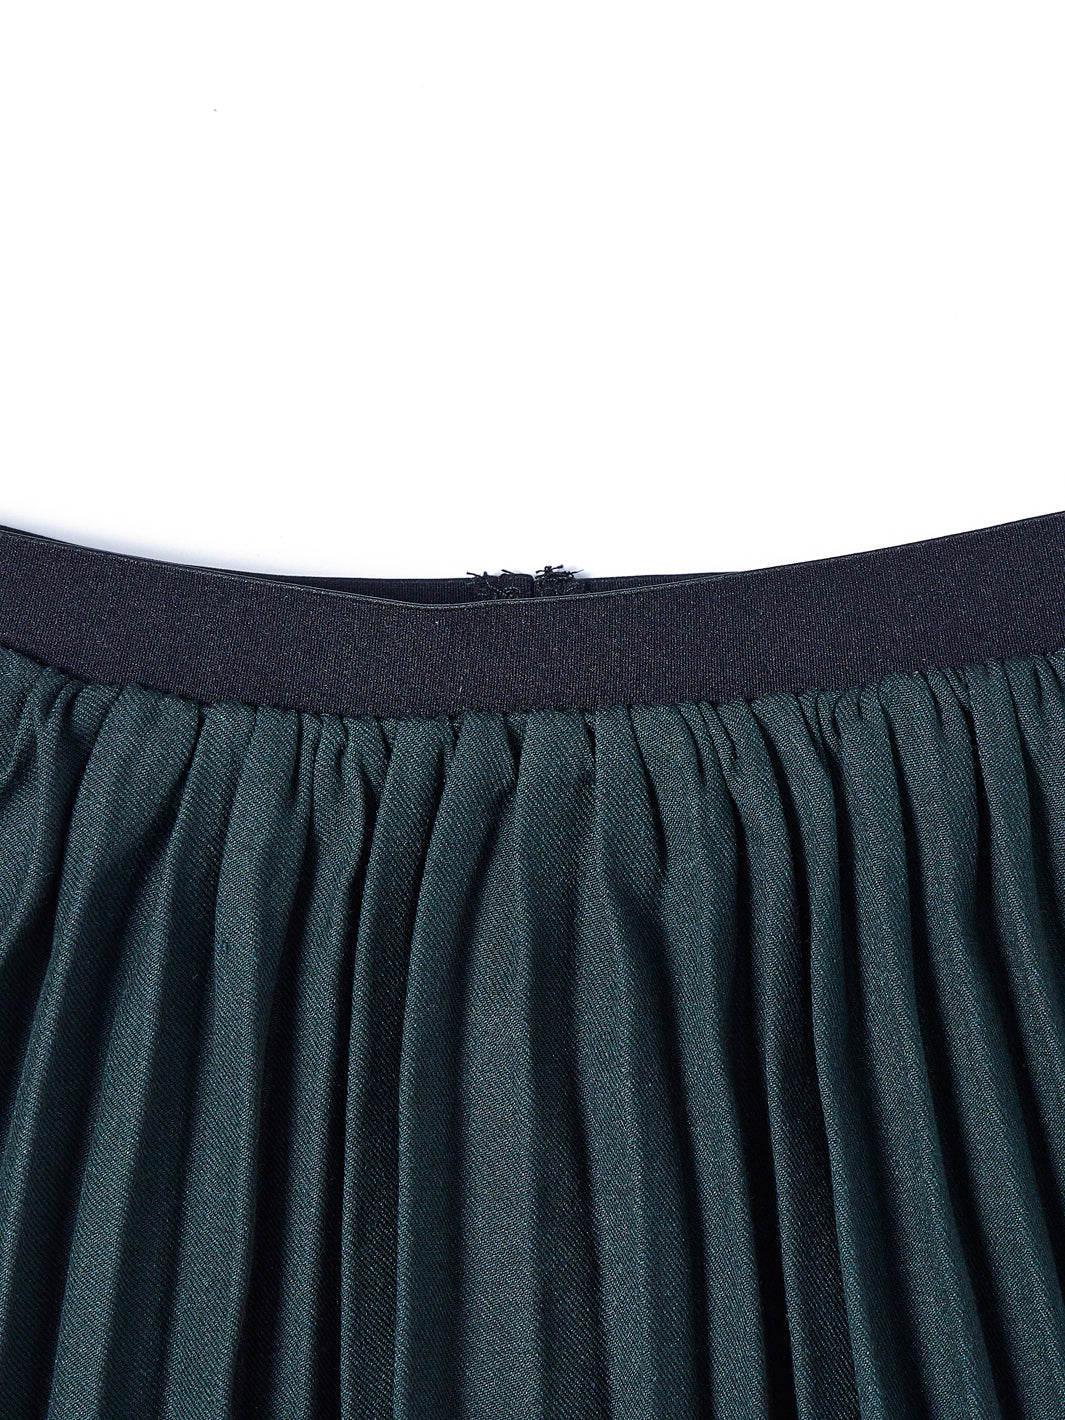 Brushed Accordion Pleated Skirt - Green